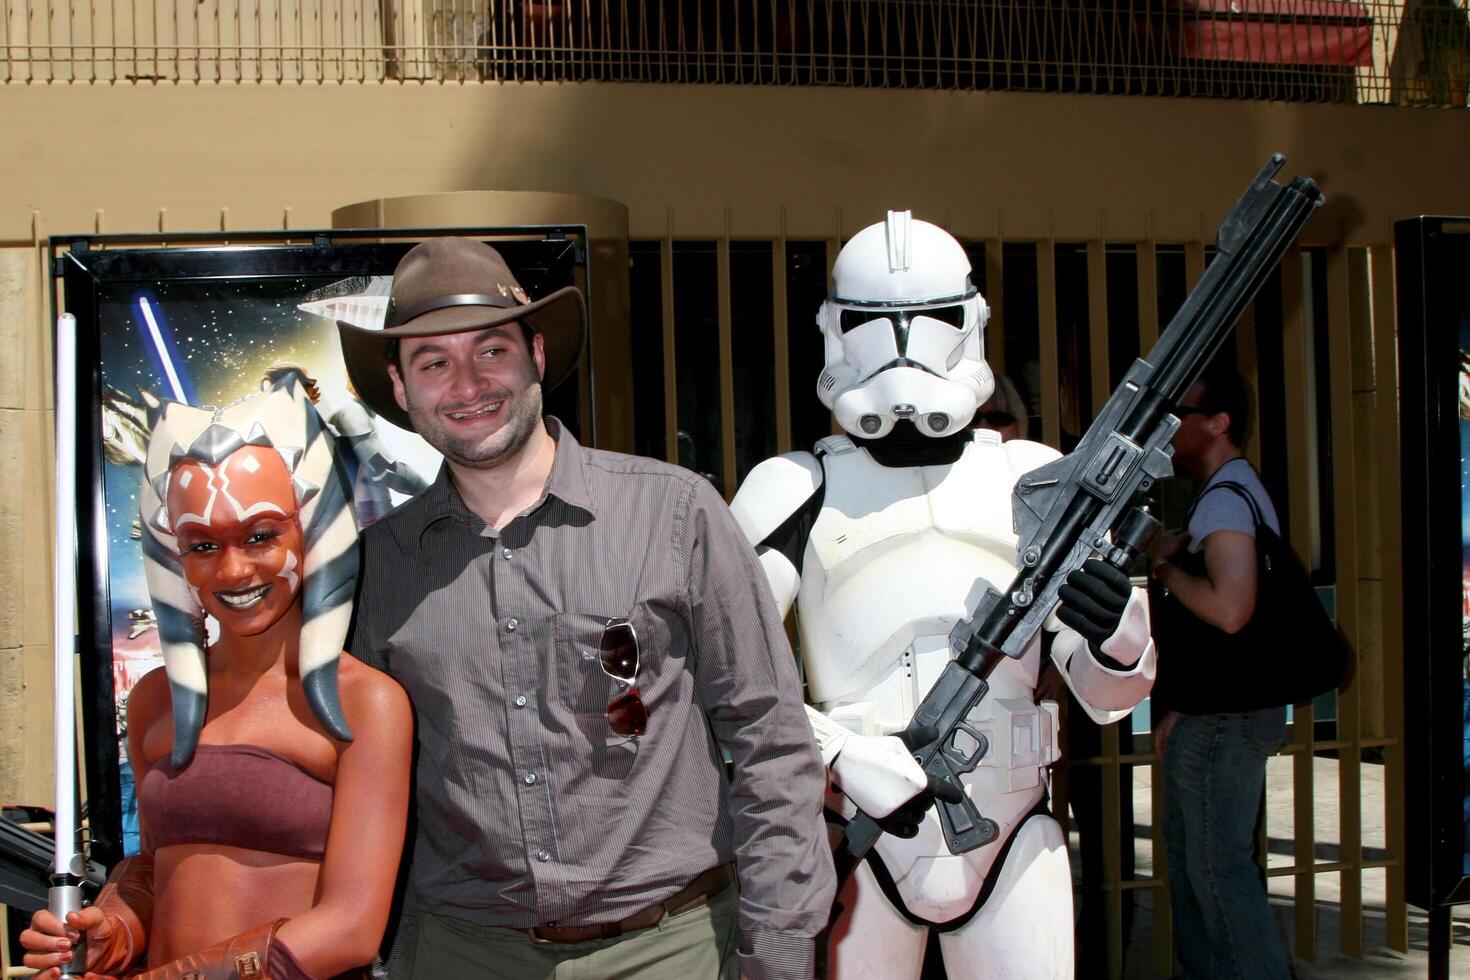 Ahsoka Tano charachter  Dave Filoni  STAR WARS  THE CLONE WARS Premiere Egyptian Theater Los Angeles, CA August 10, 2008 photo